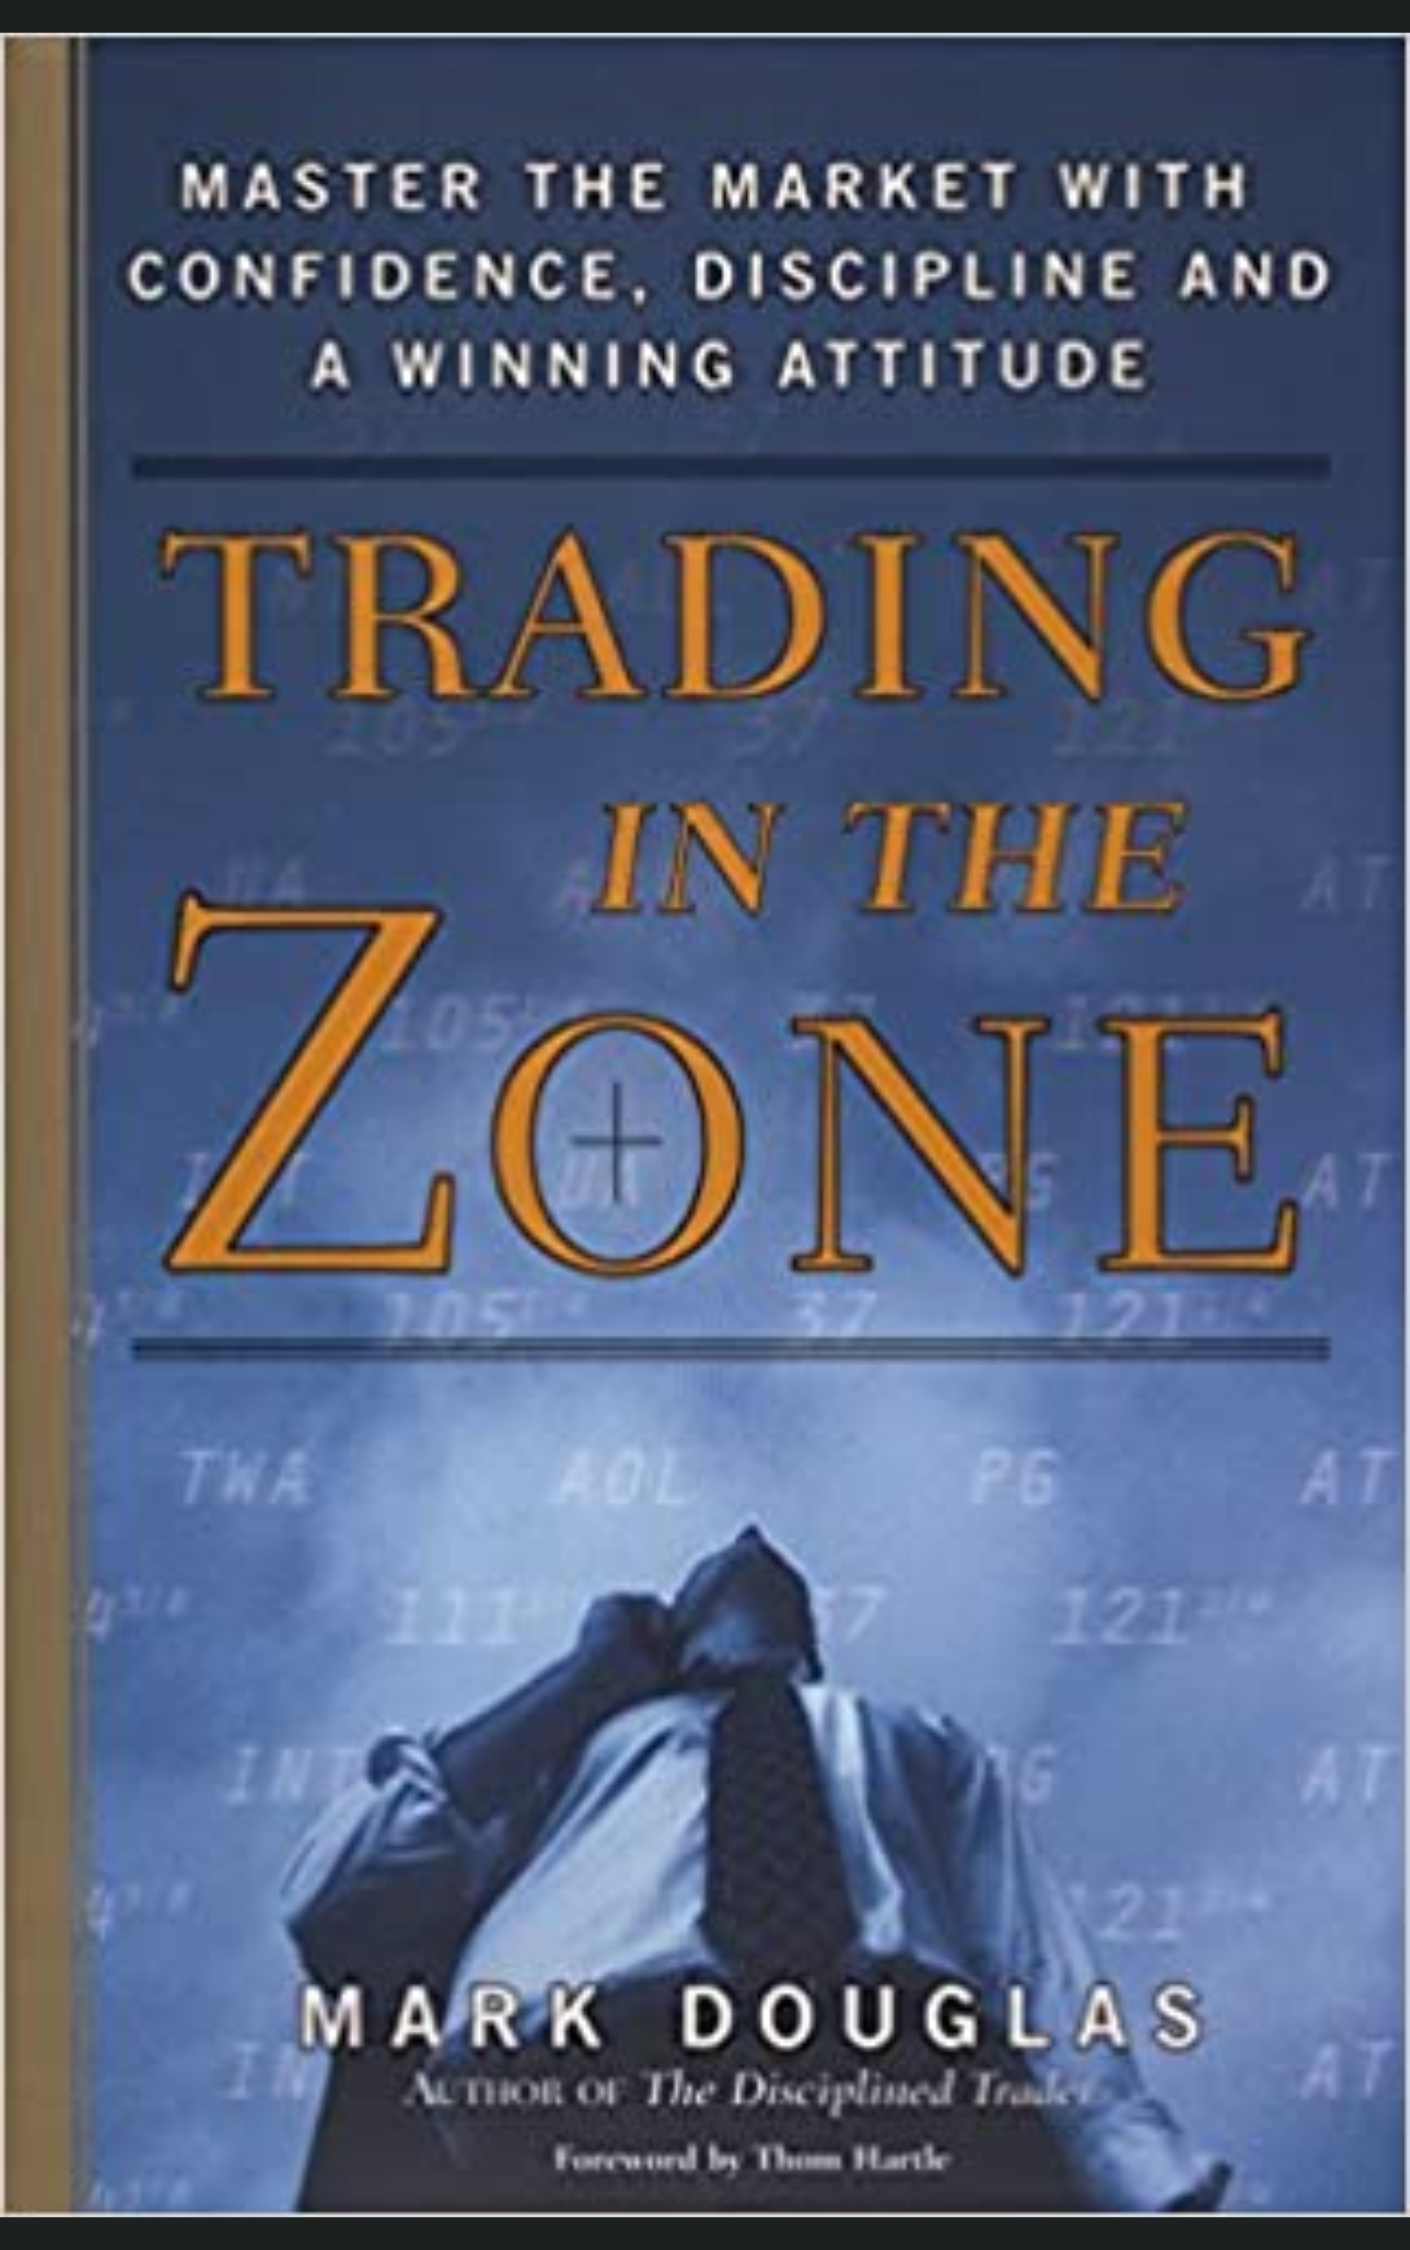 TRADING IN THE ZONE [PAPERBACK] by MARK DOUGLAS